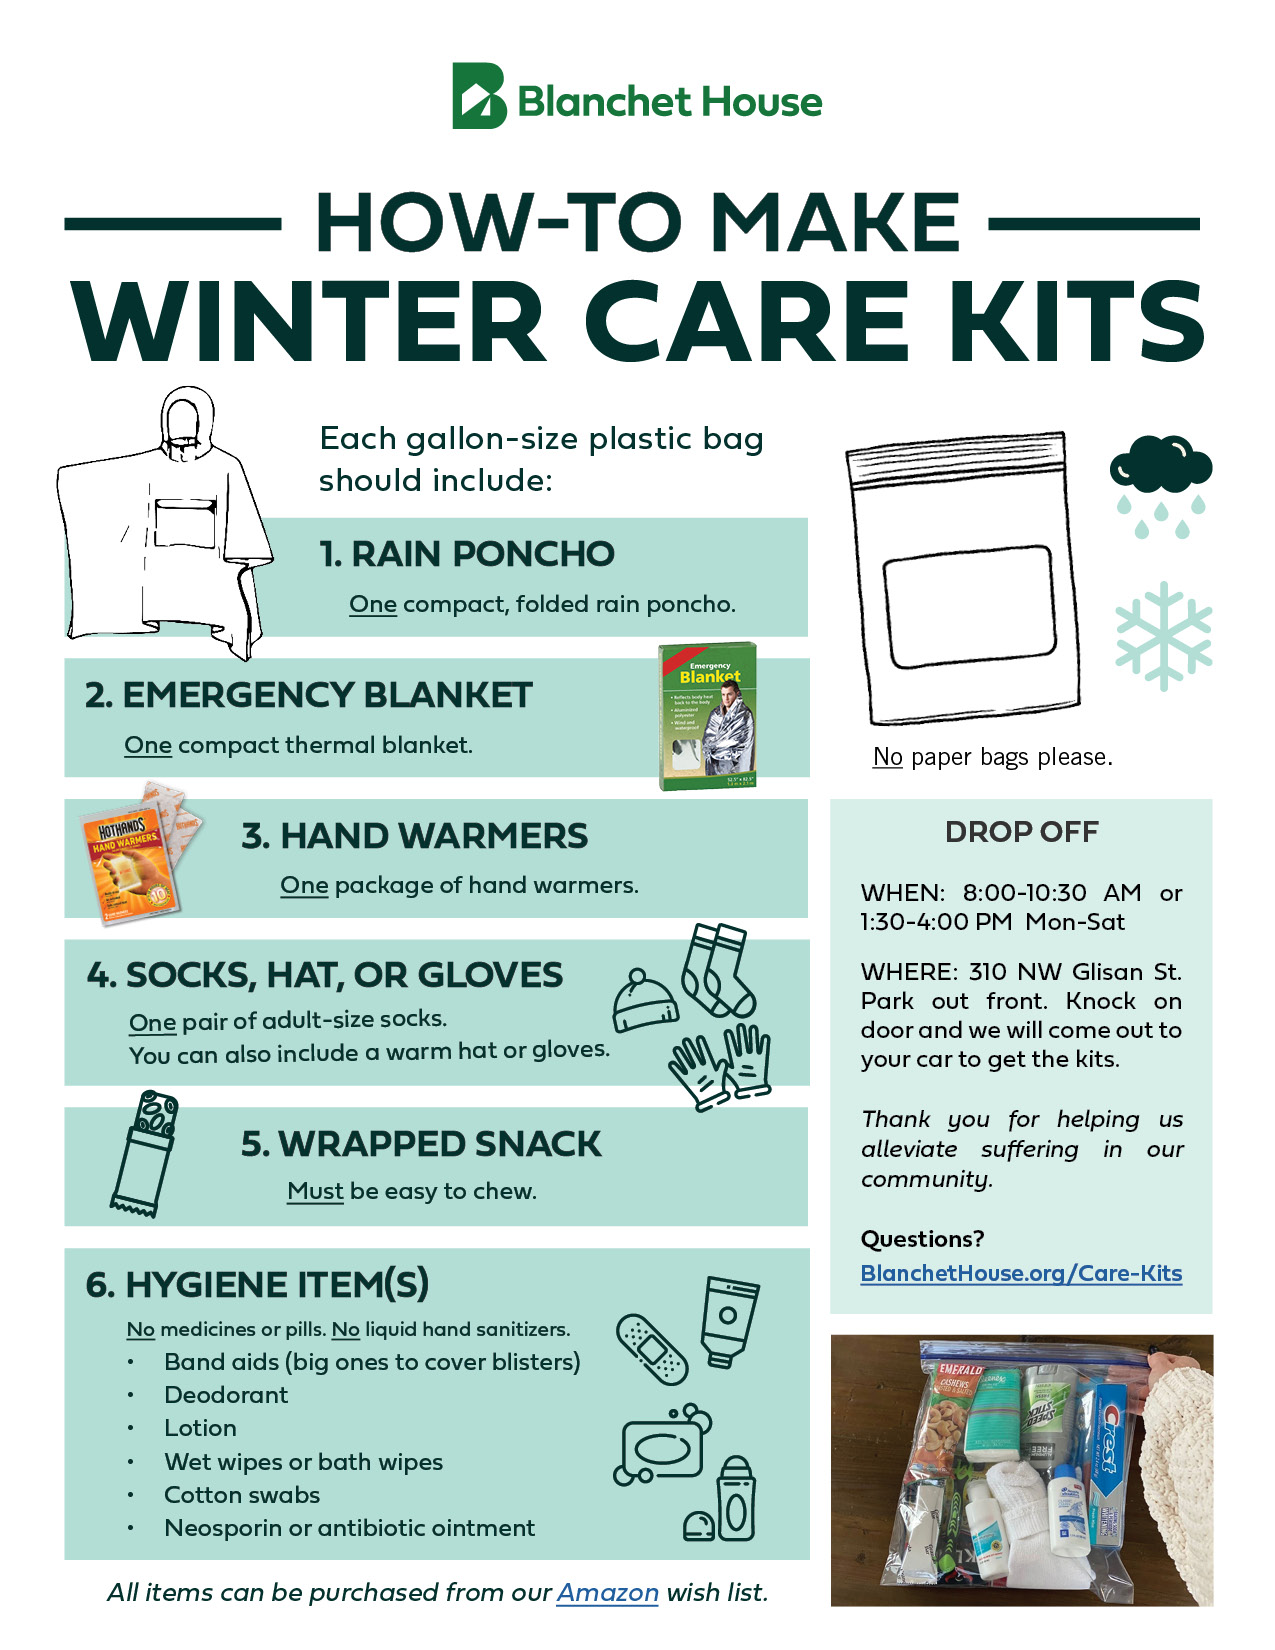 How-To Make Winter Care Kits